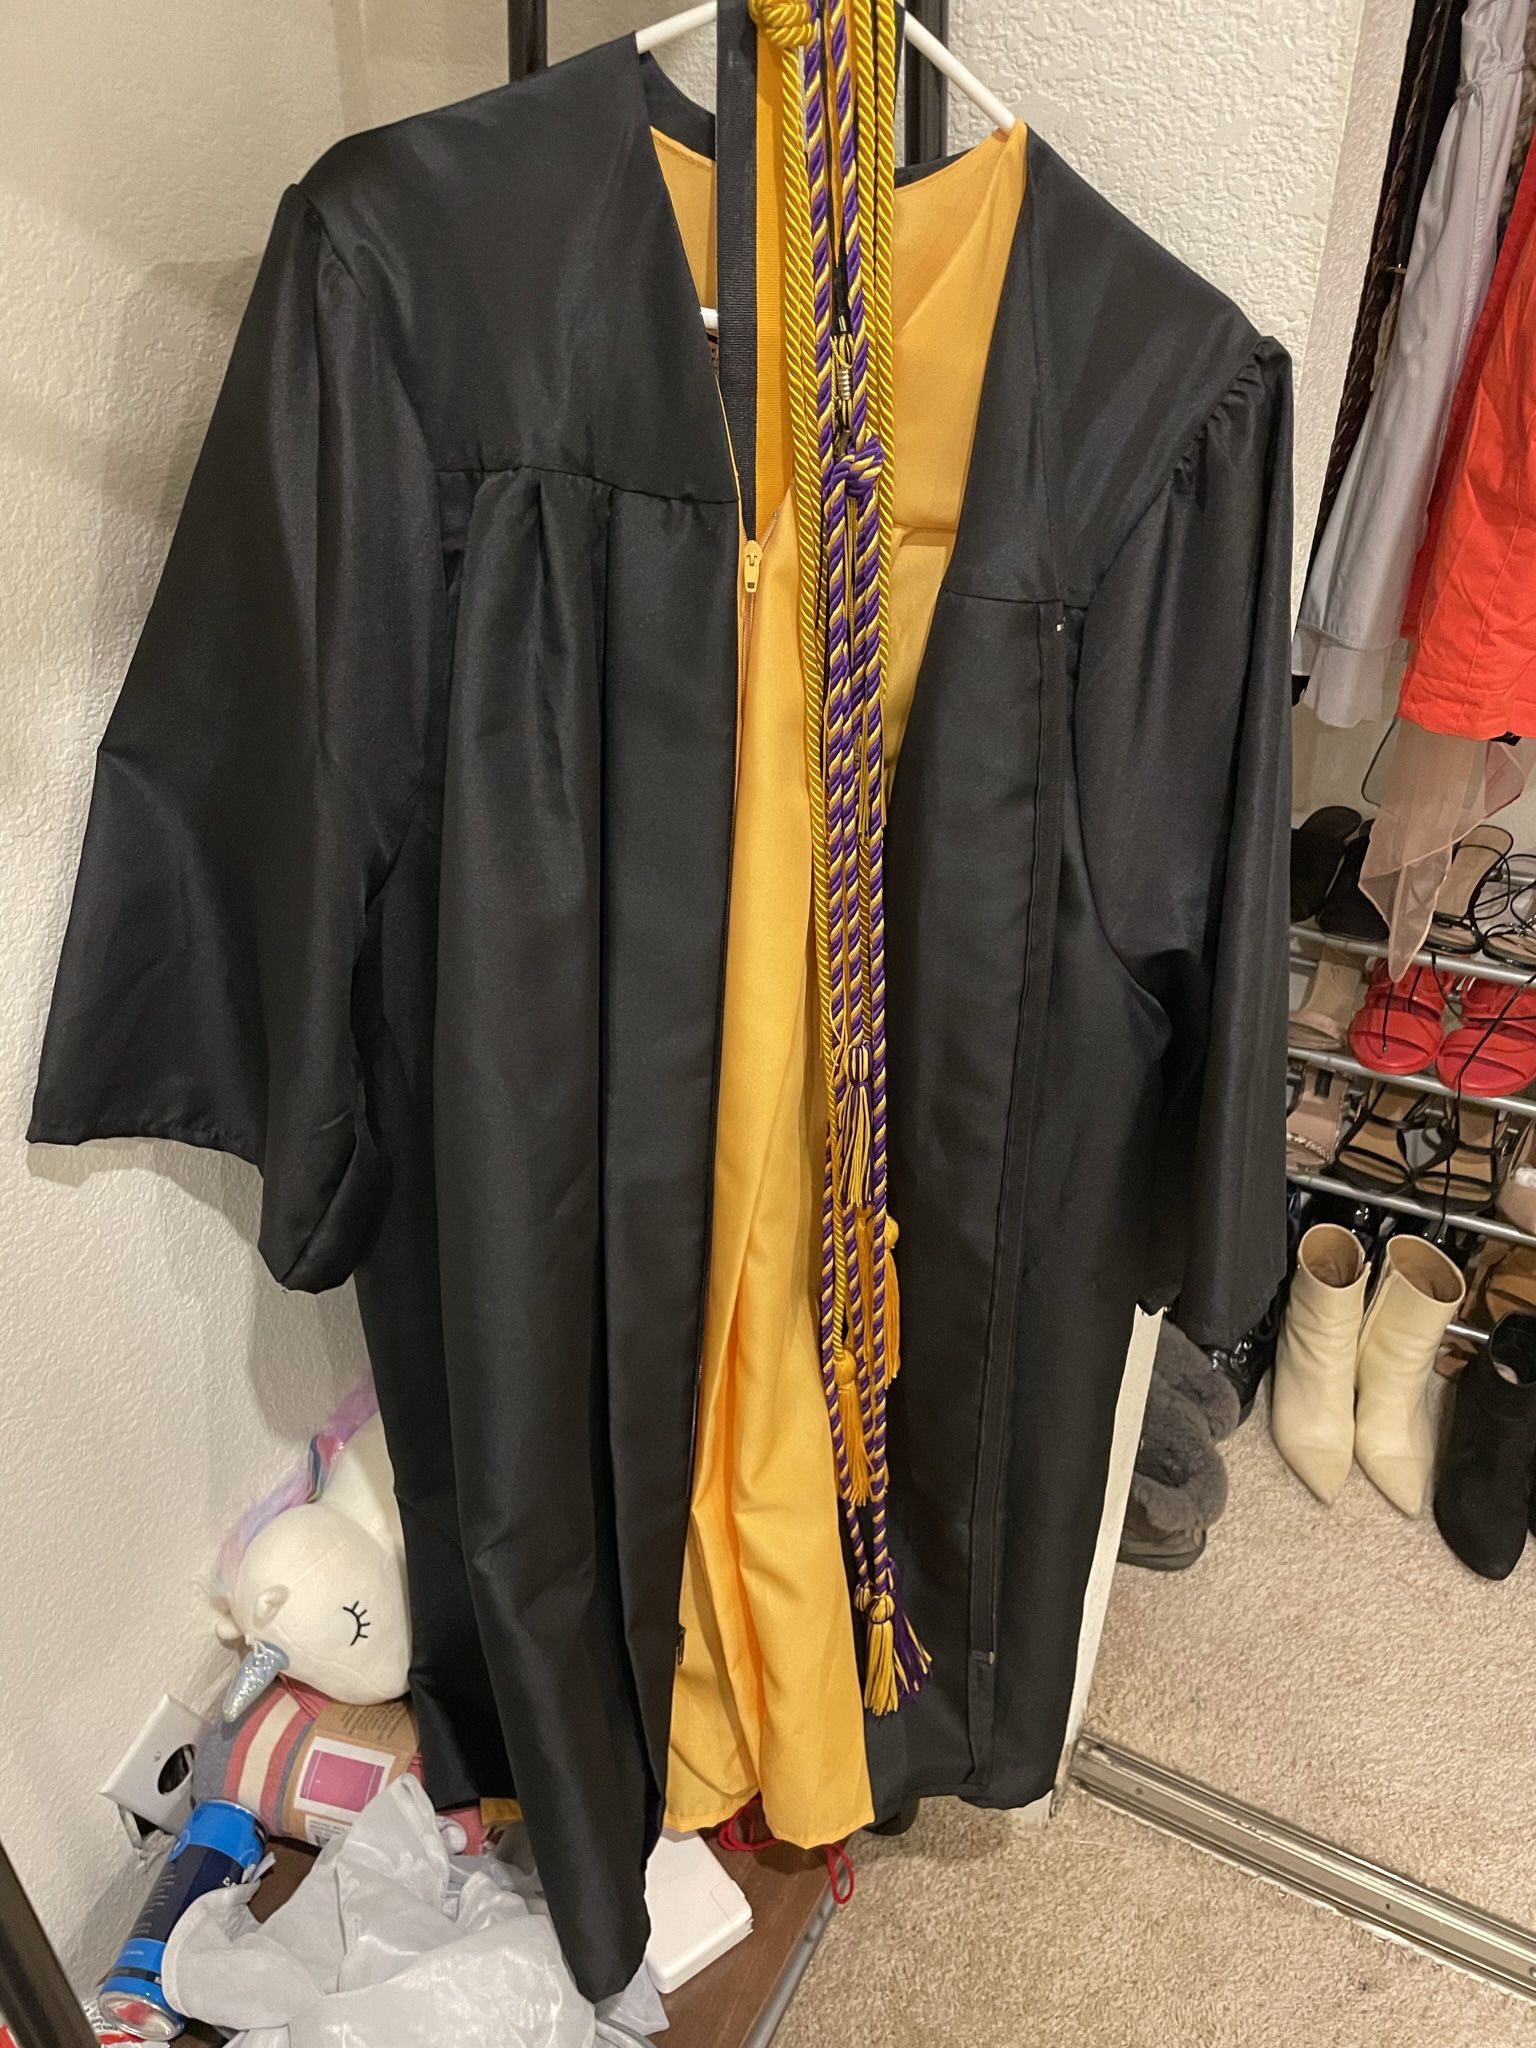 1 Graduation Gown size small with caps